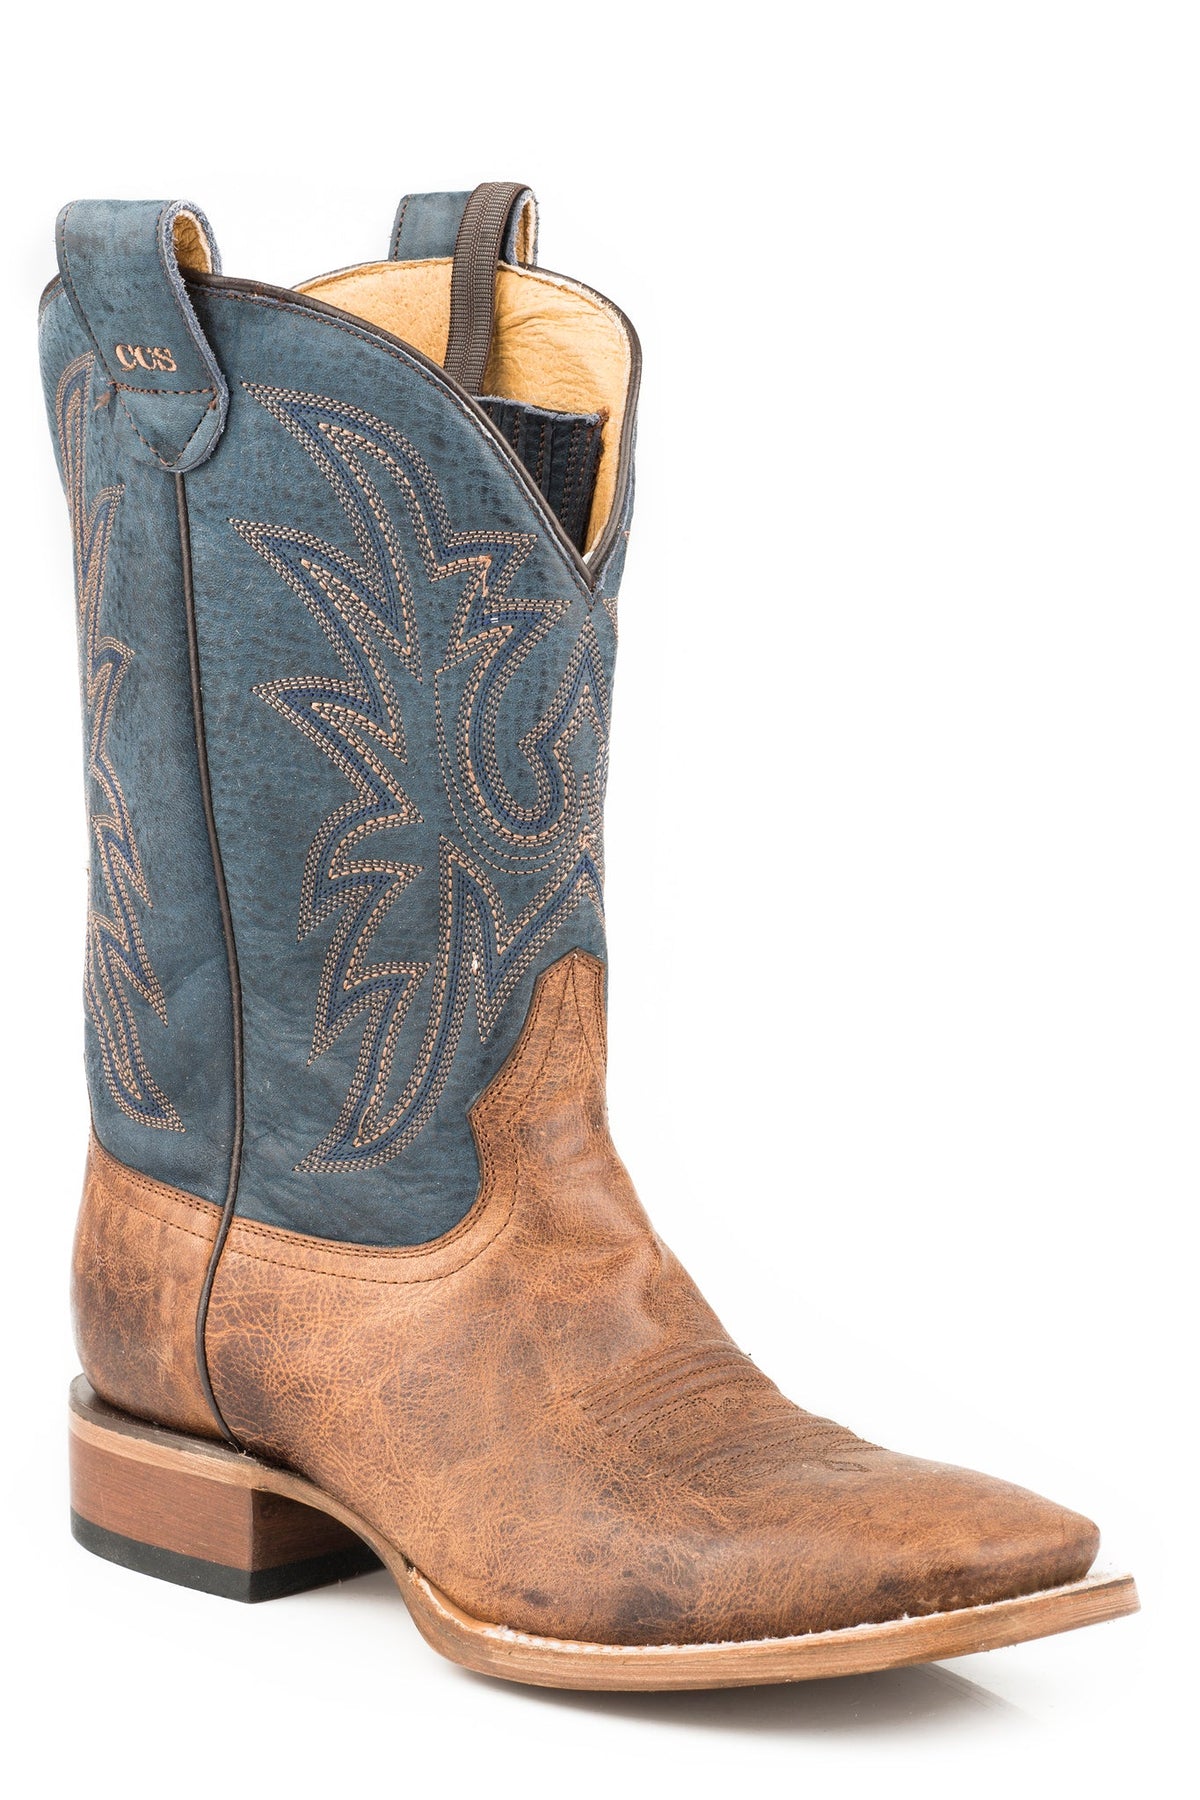 Roper Mens Leather Concealed Carry Boot Burnished Tan Vamp With Blue Embroidered Upper